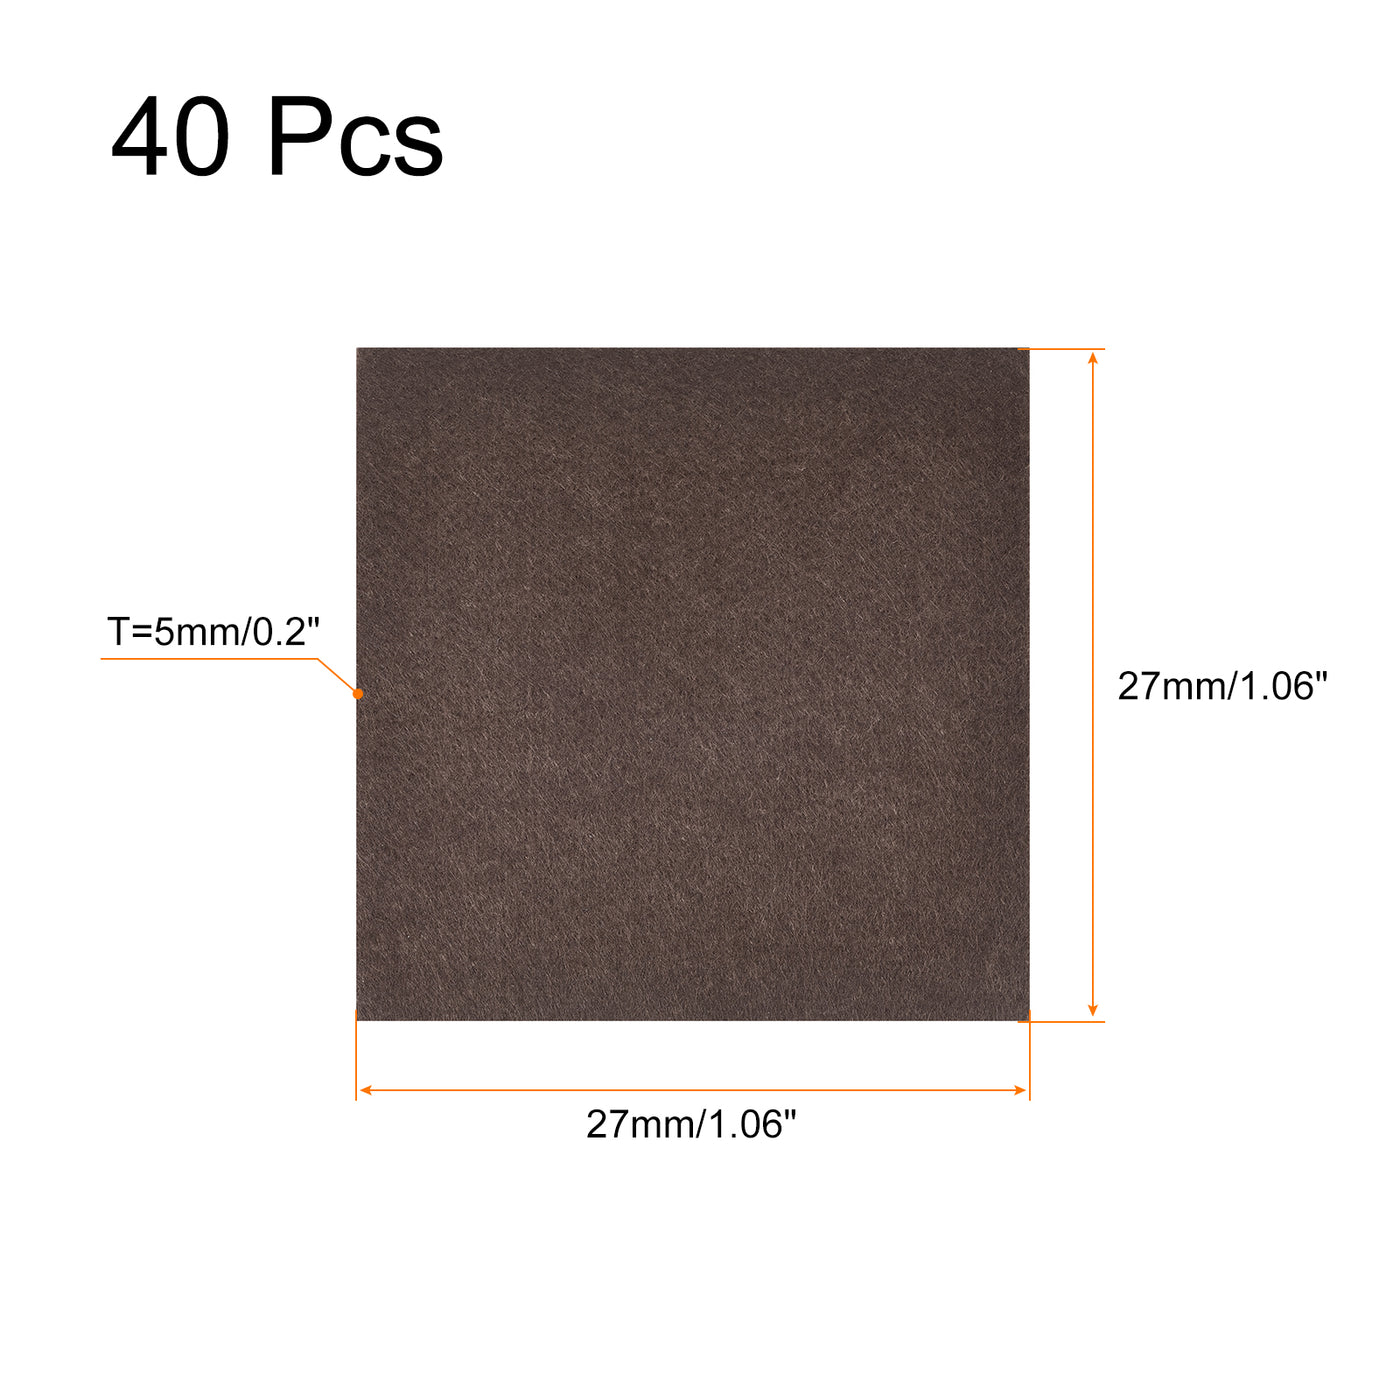 uxcell Uxcell Felt Furniture Pads, 27mm x 27mm Self Adhesive Square Floor Protectors for Furniture Legs Hardwood Floor, Brown 40Pcs